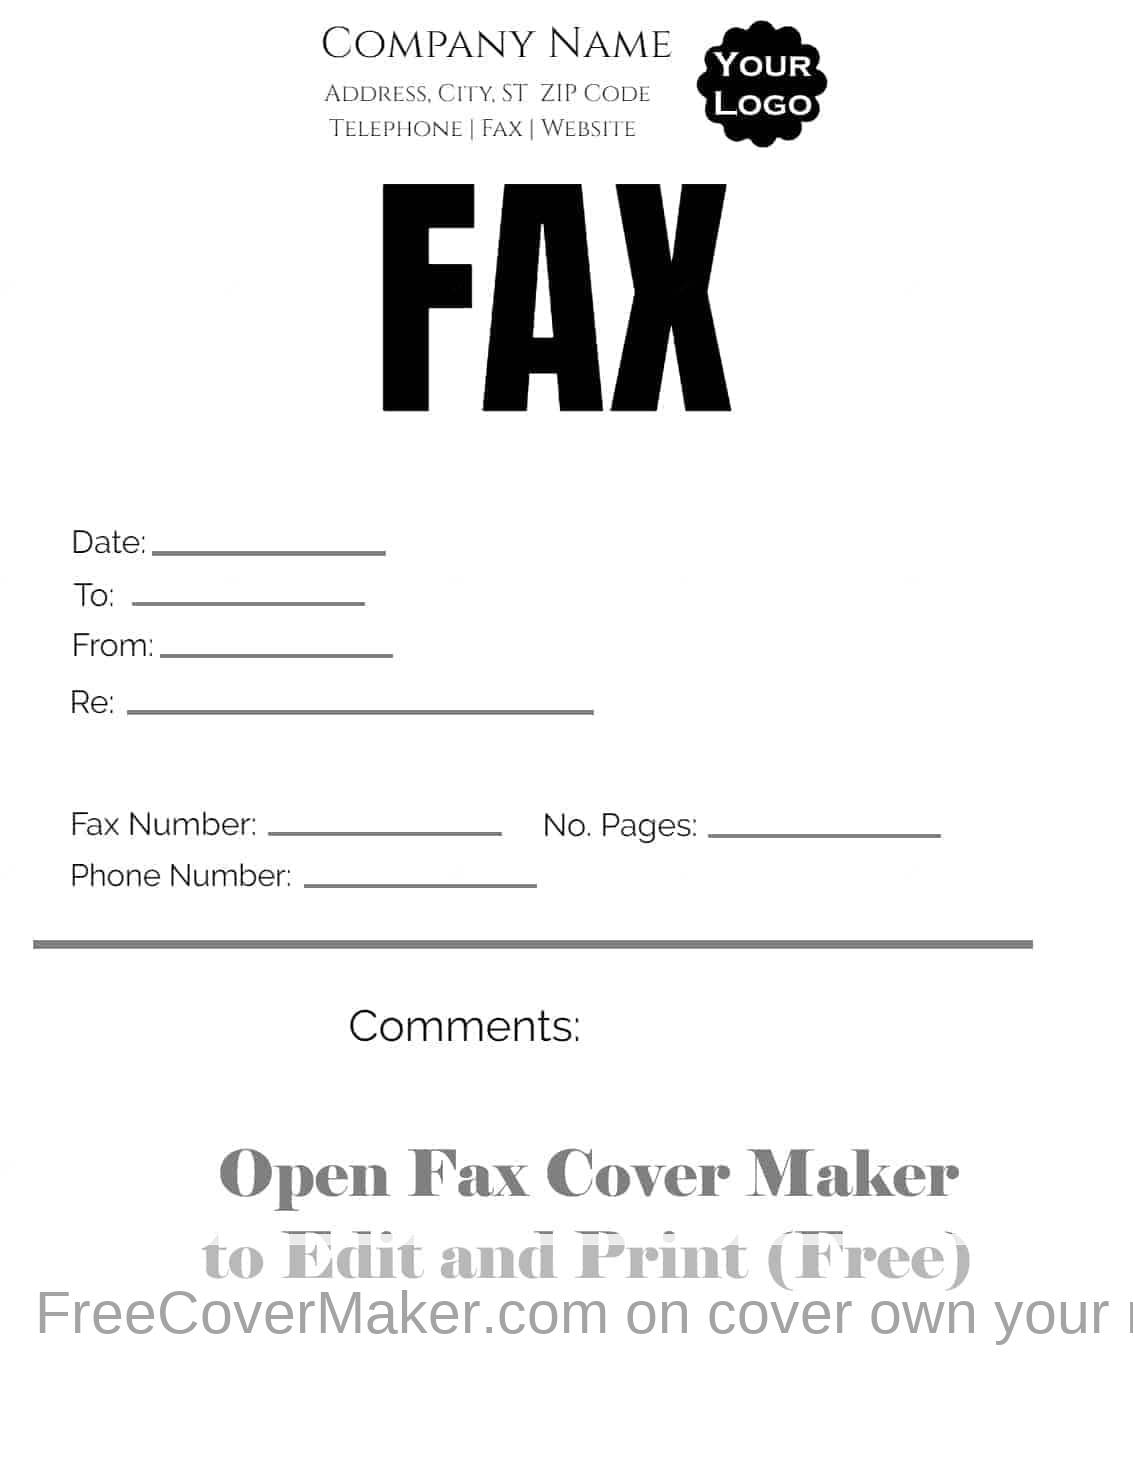 Free fax cover sheet | Customize online then print